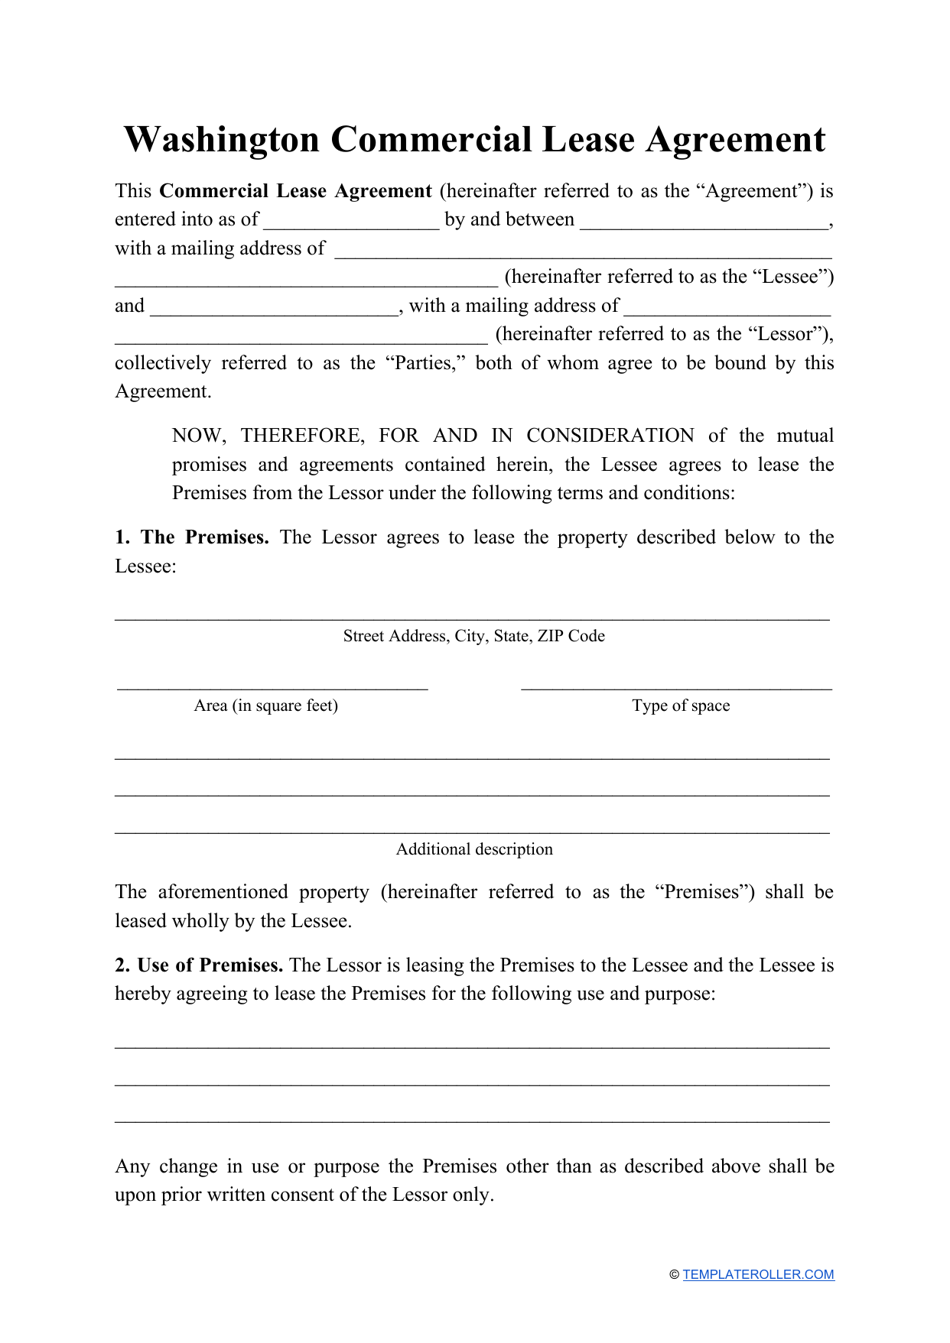 Commercial Lease Agreement Template - Washington, Page 1